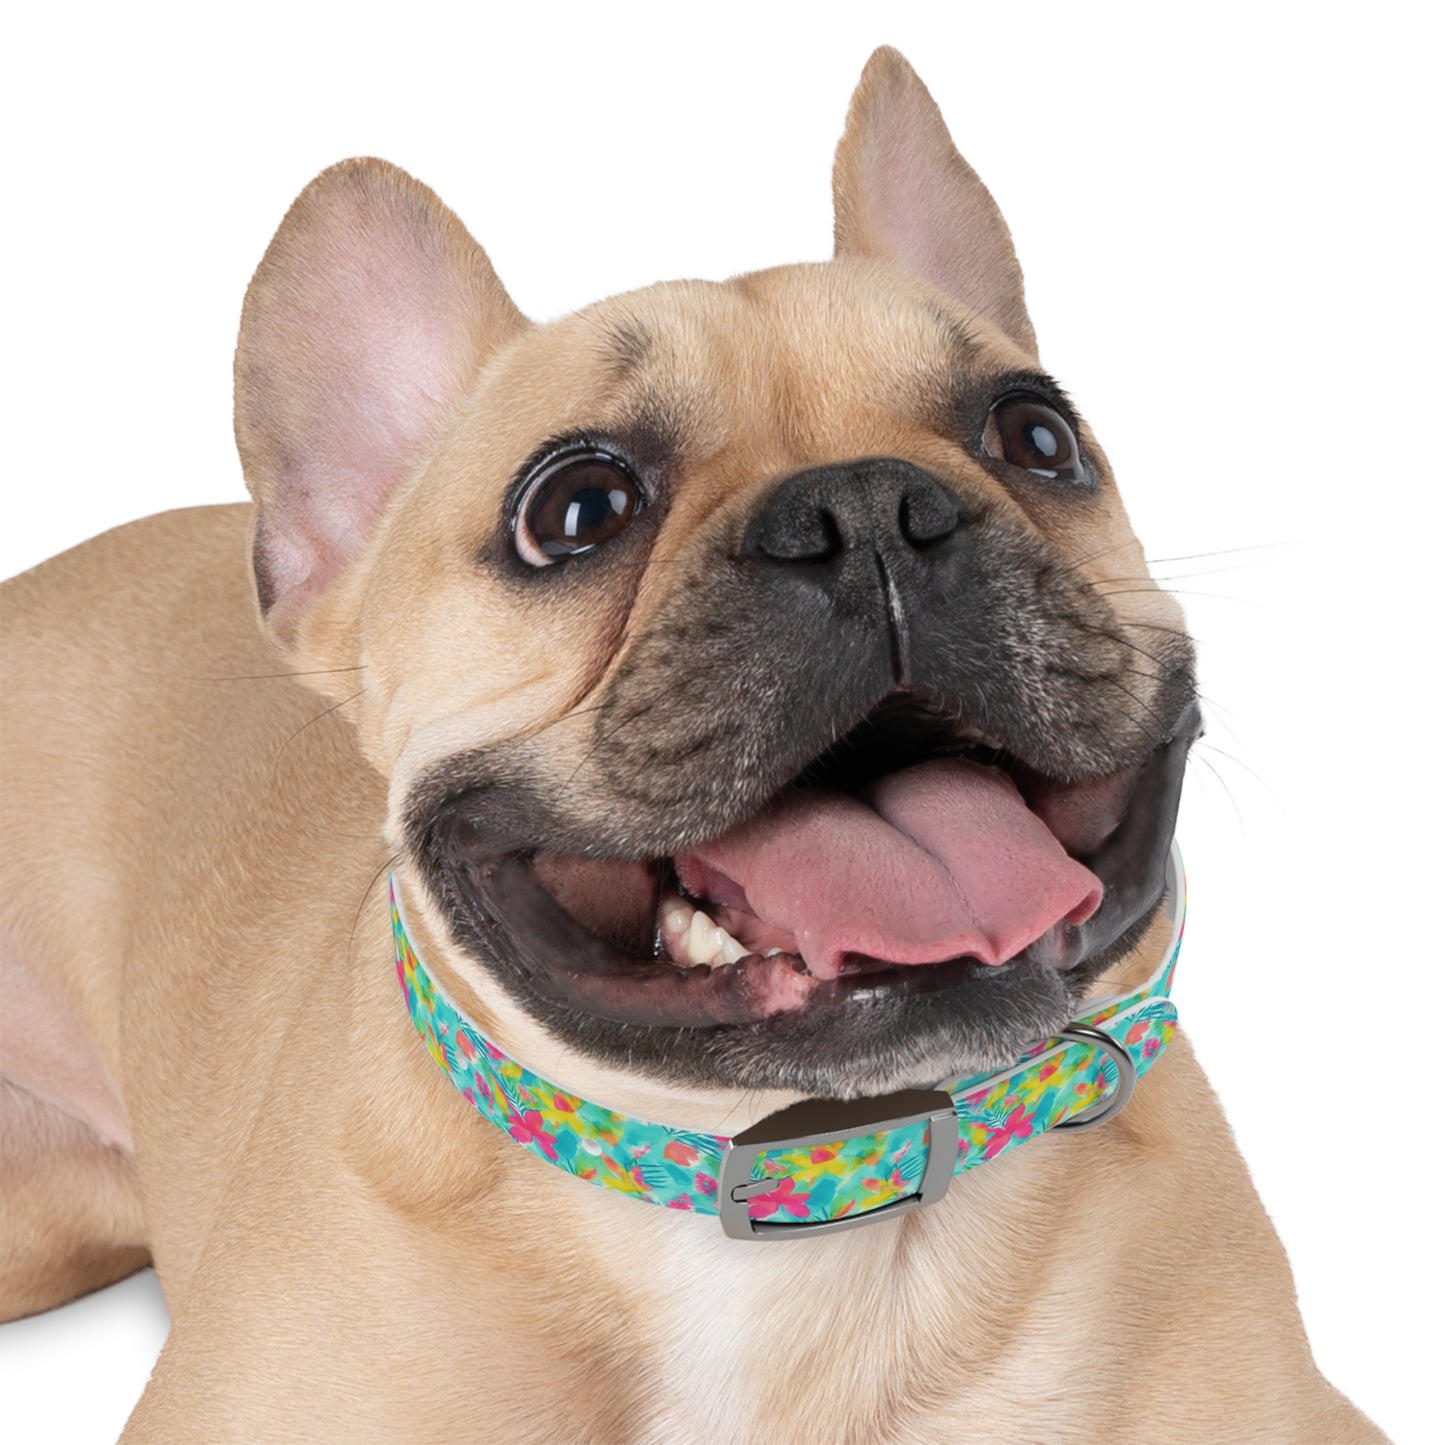 Bright Summer Vibes Watercolor Pattern Dog Collar